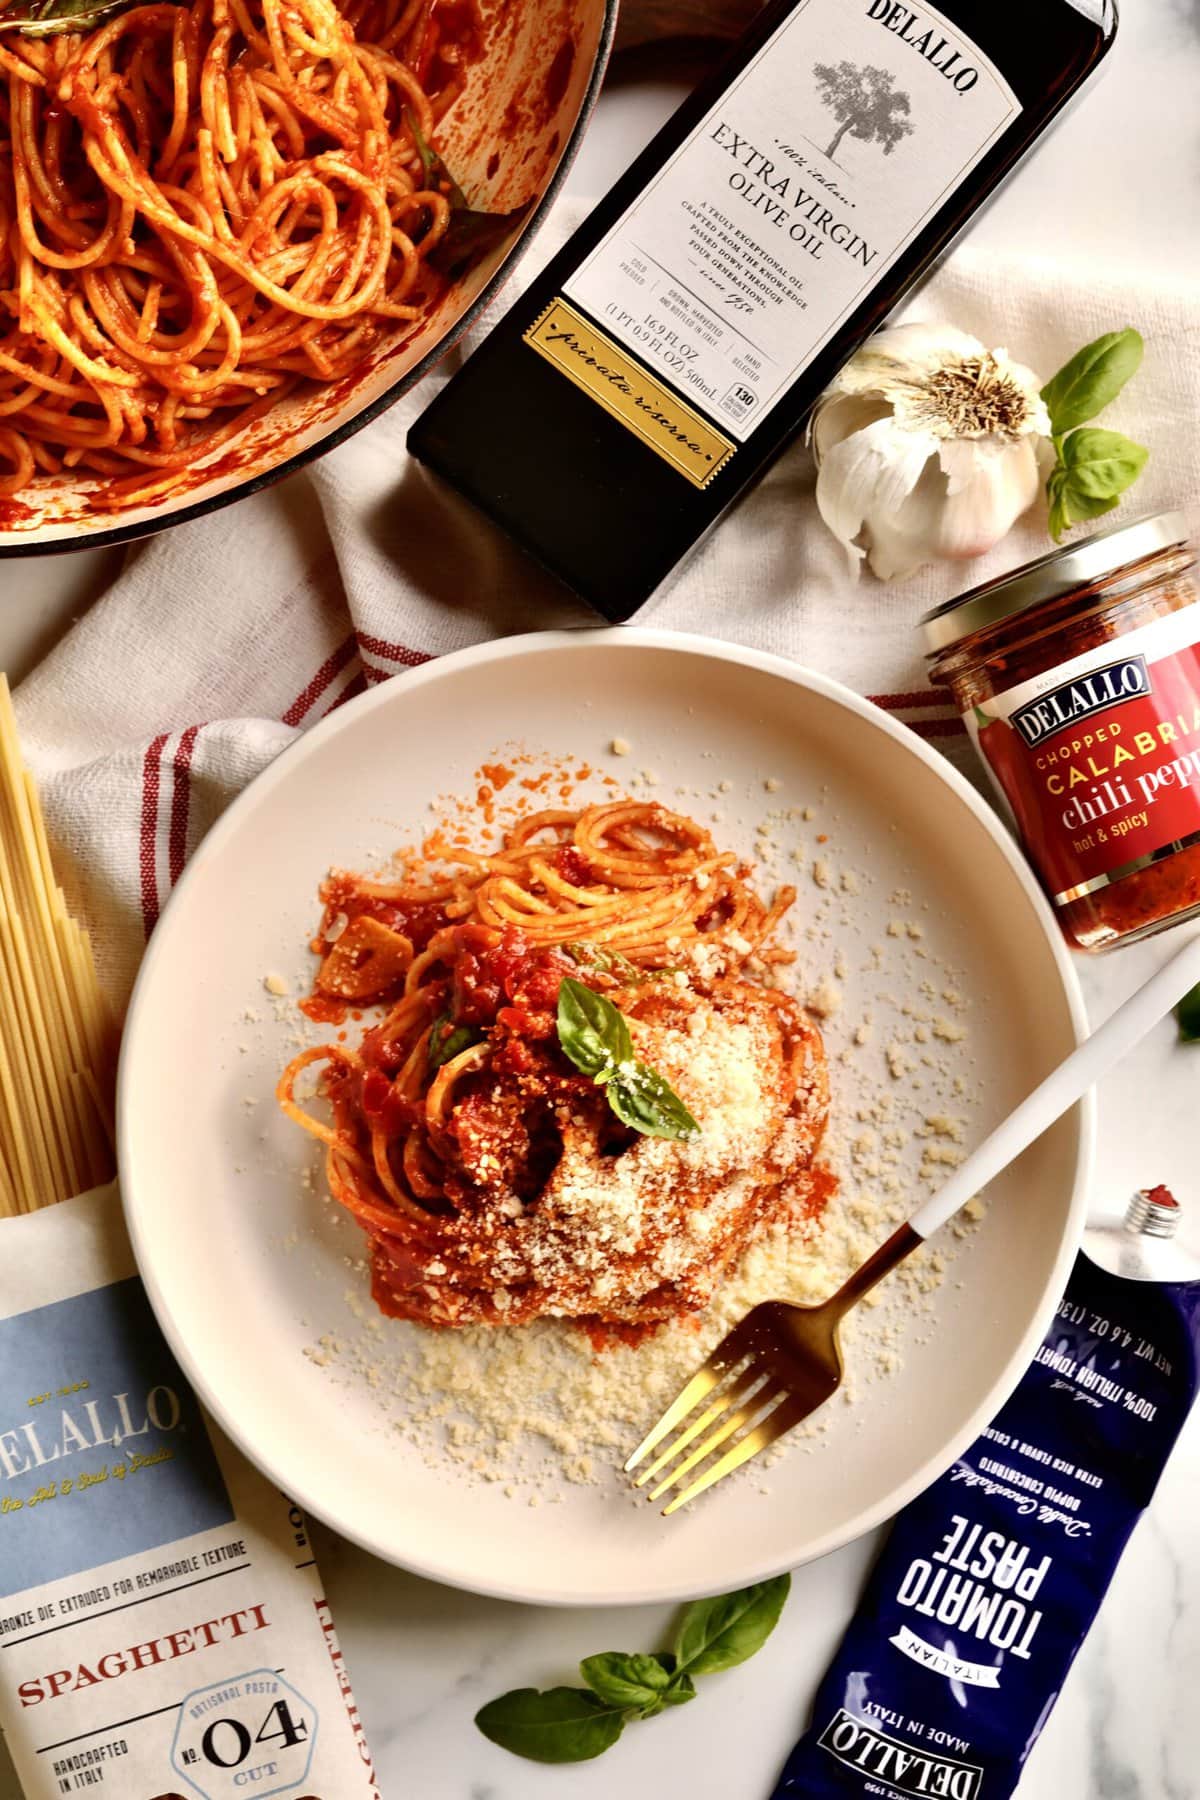 Quick Tomato Paste Pasta Sauce Recipe with Spaghetti on a plate. All the products and ingredients surround the plate of spaghetti.